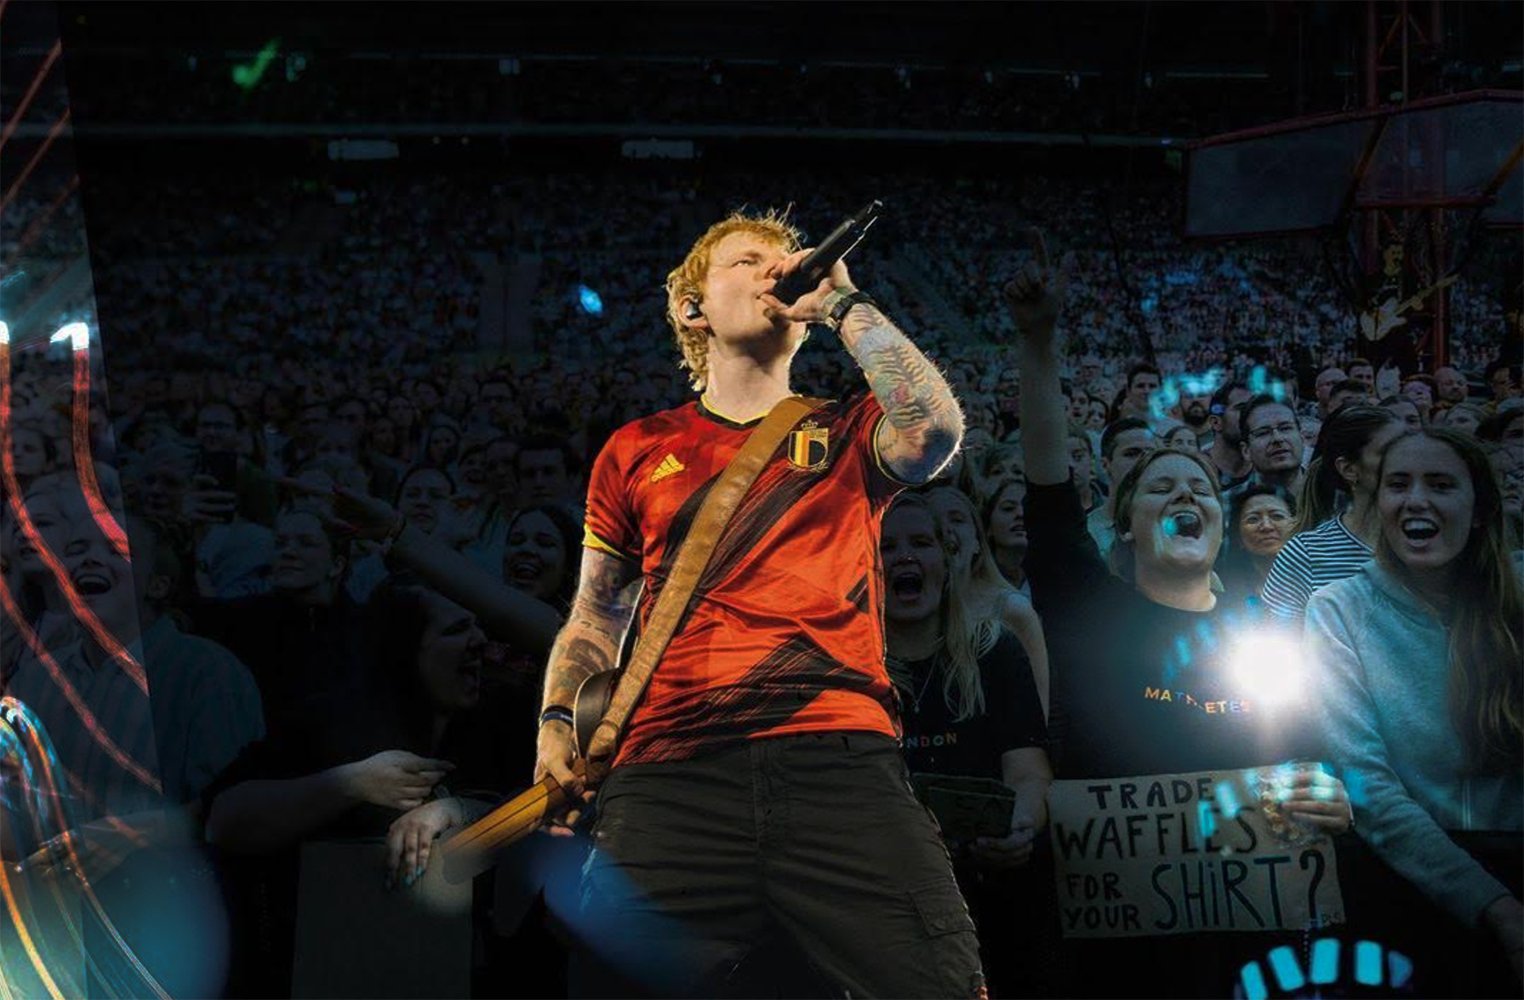 Ed Sheeran Becomes "The King Of Spotify" With Over 100 Million Subscribers - DSF Antique Jewelry